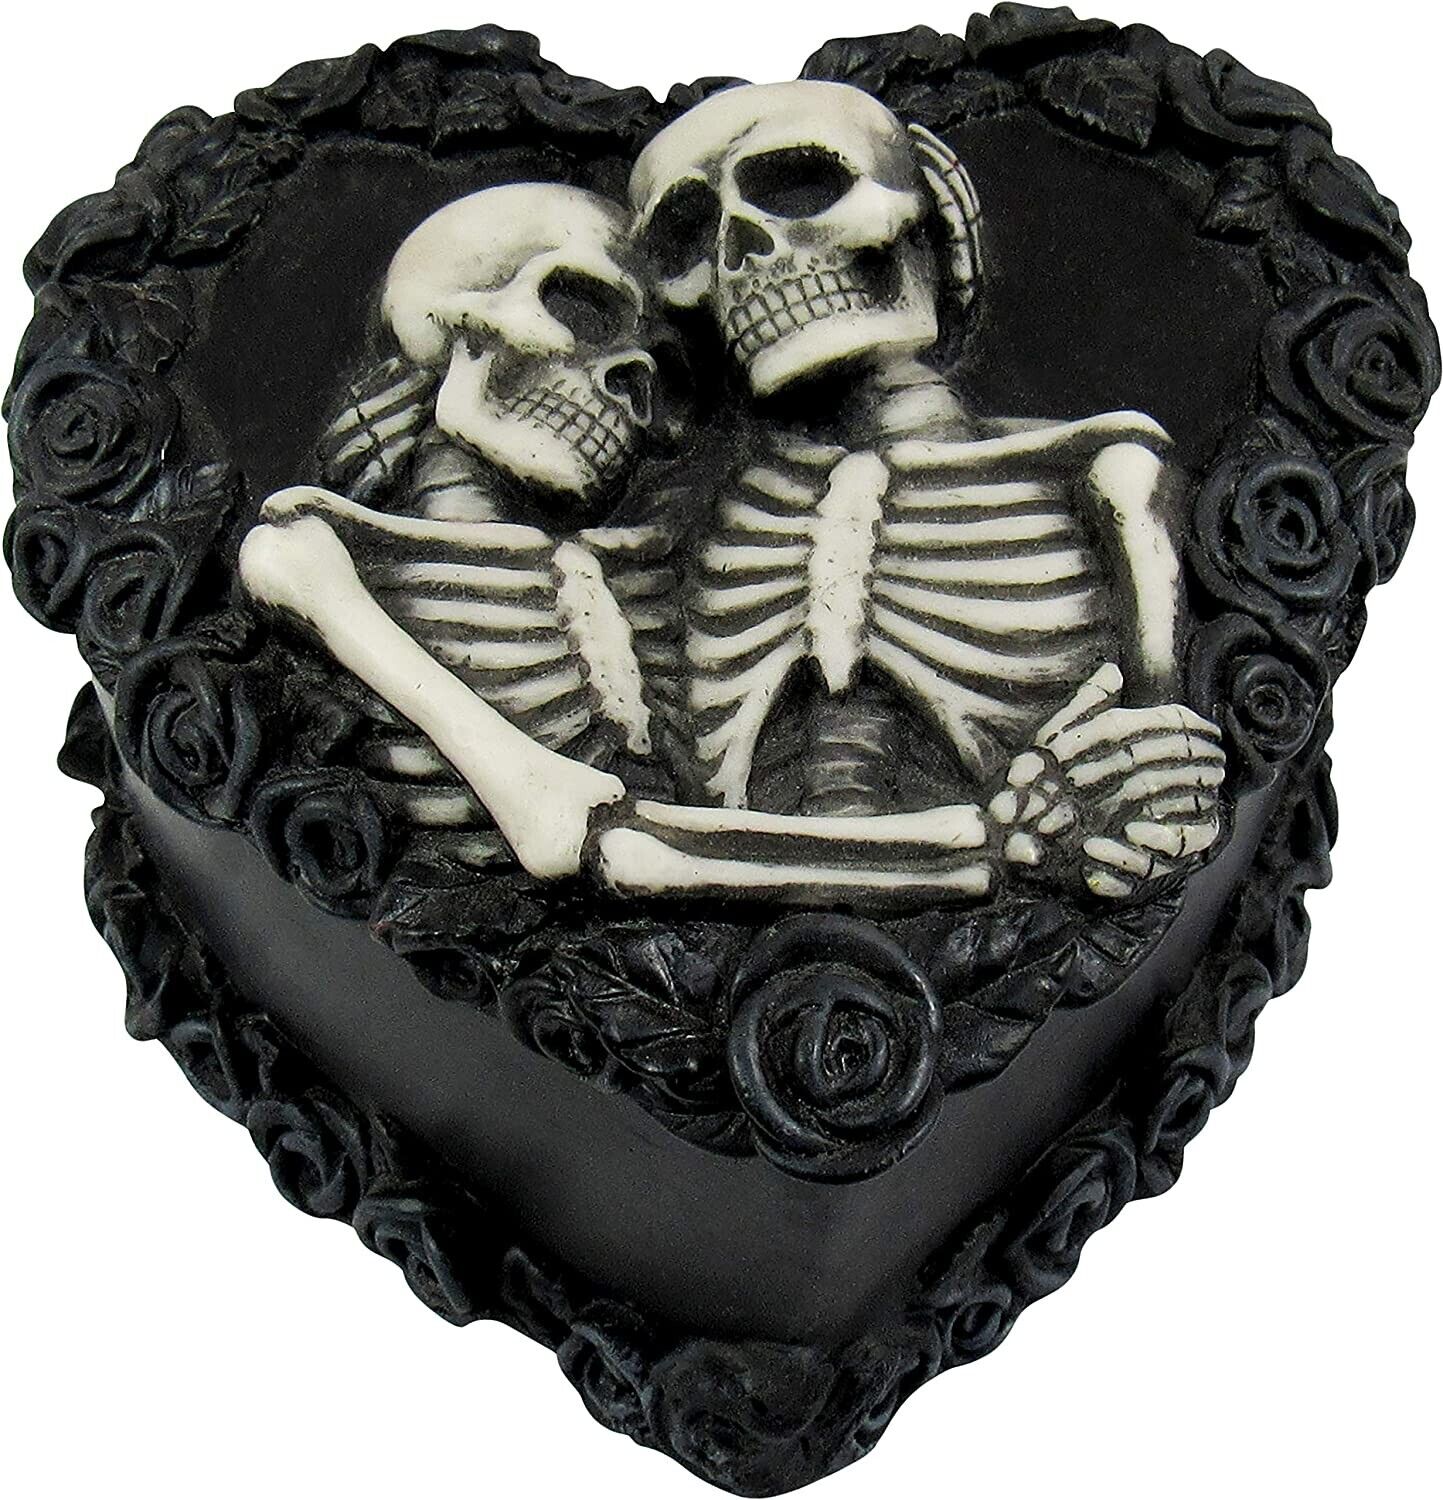 To Have & To Hold, Gothic Skeleton Lovers Embracing on Black Rose Keepsake